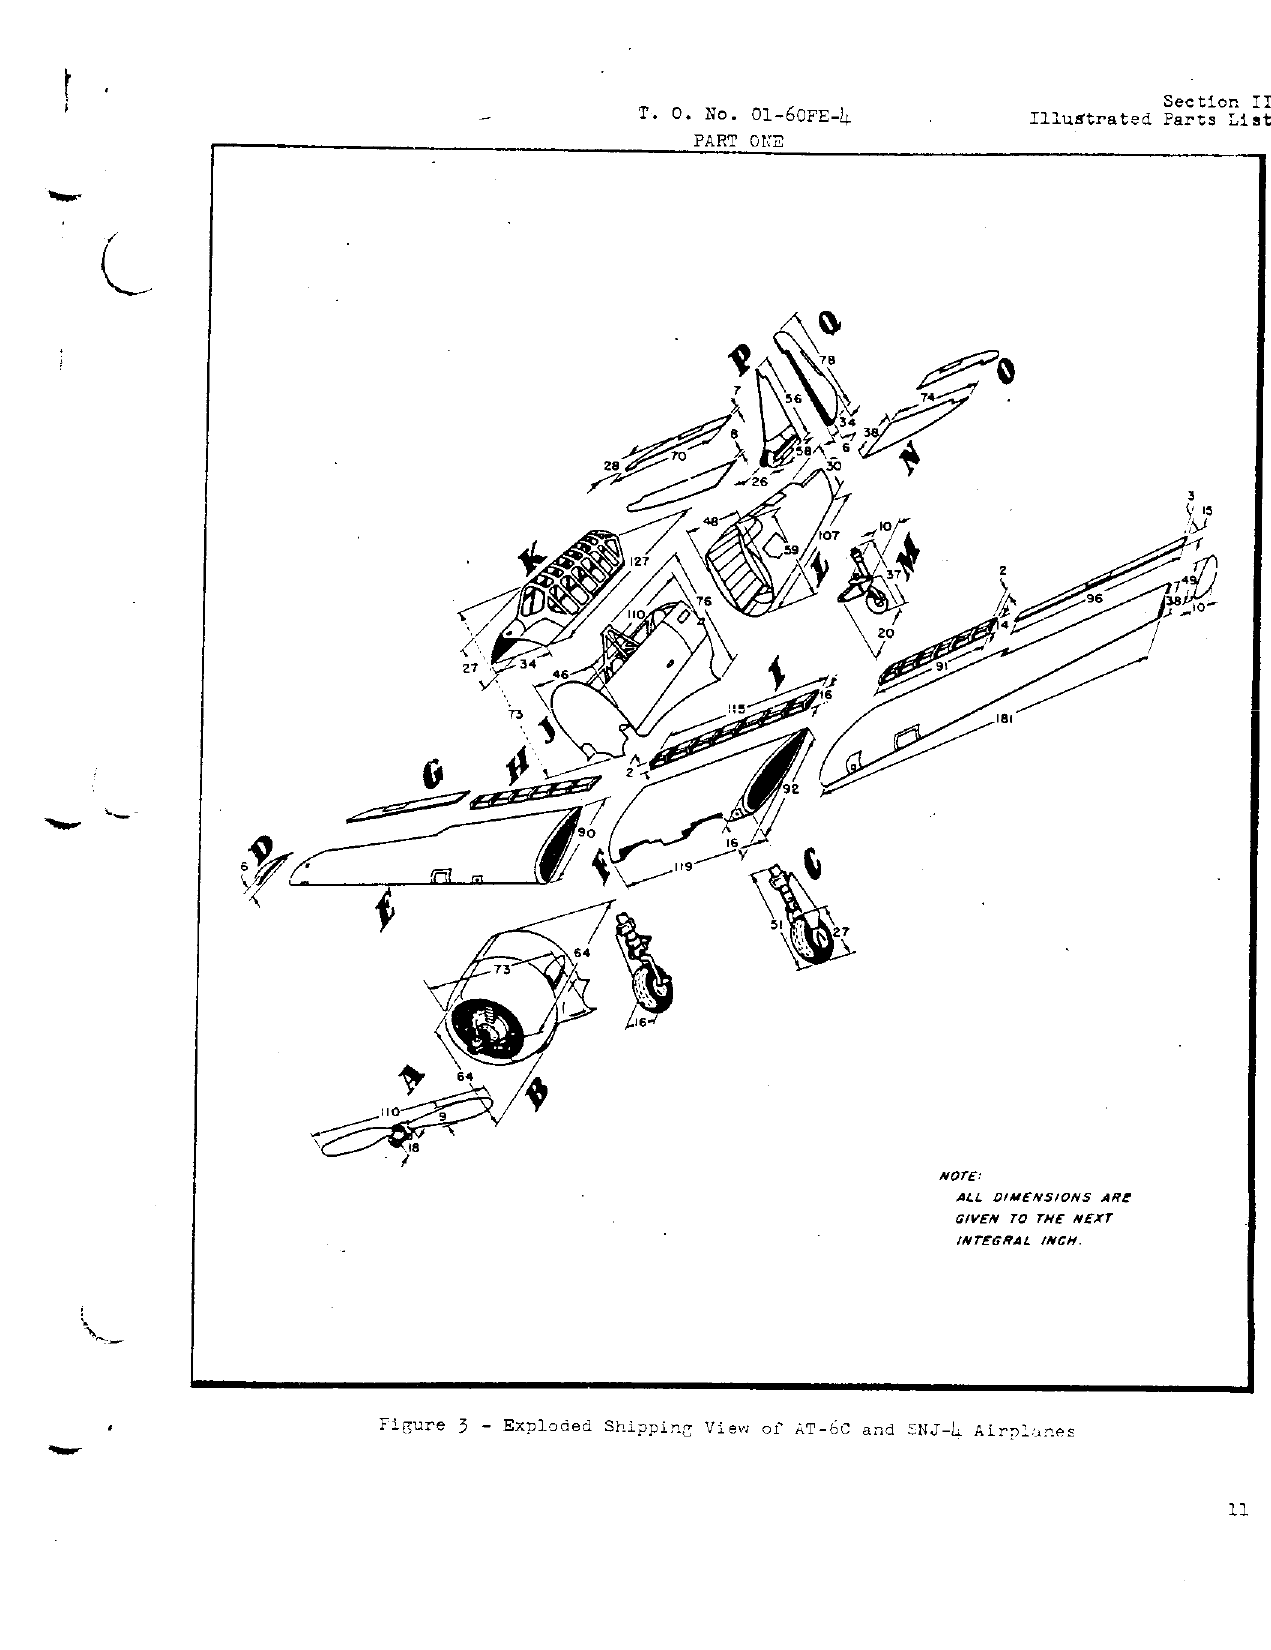 Sample page 5 from AirCorps Library document: Illustrated Parts Catalog for AT-6C and SNJ-4 Airplanes 